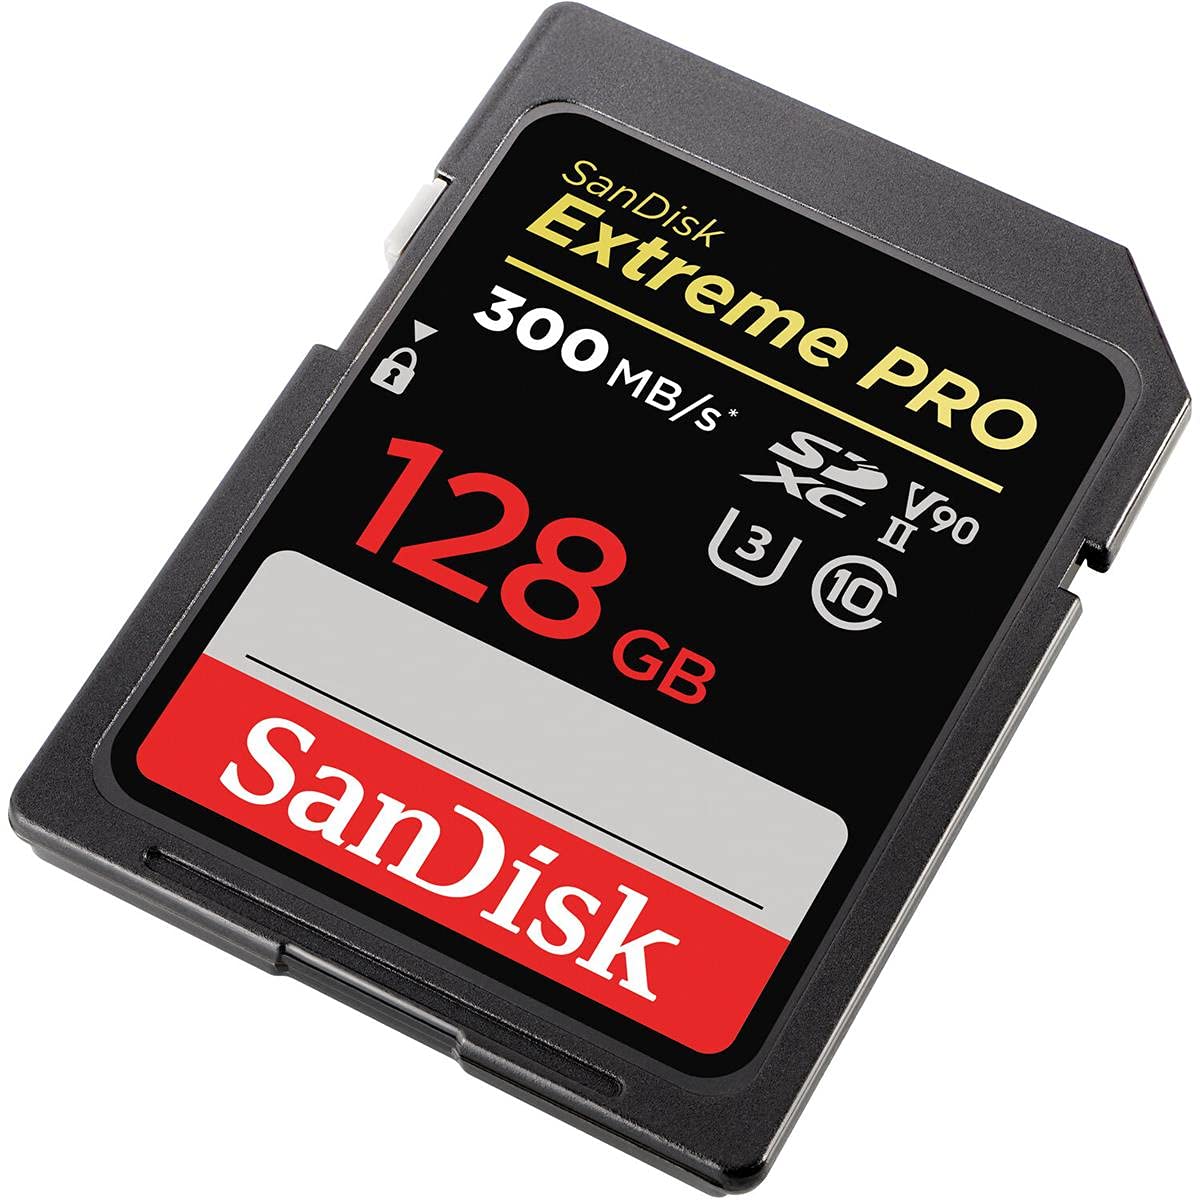 Sandisk Extreme PRO SD UHS-II Card 300 MBPS 128GB